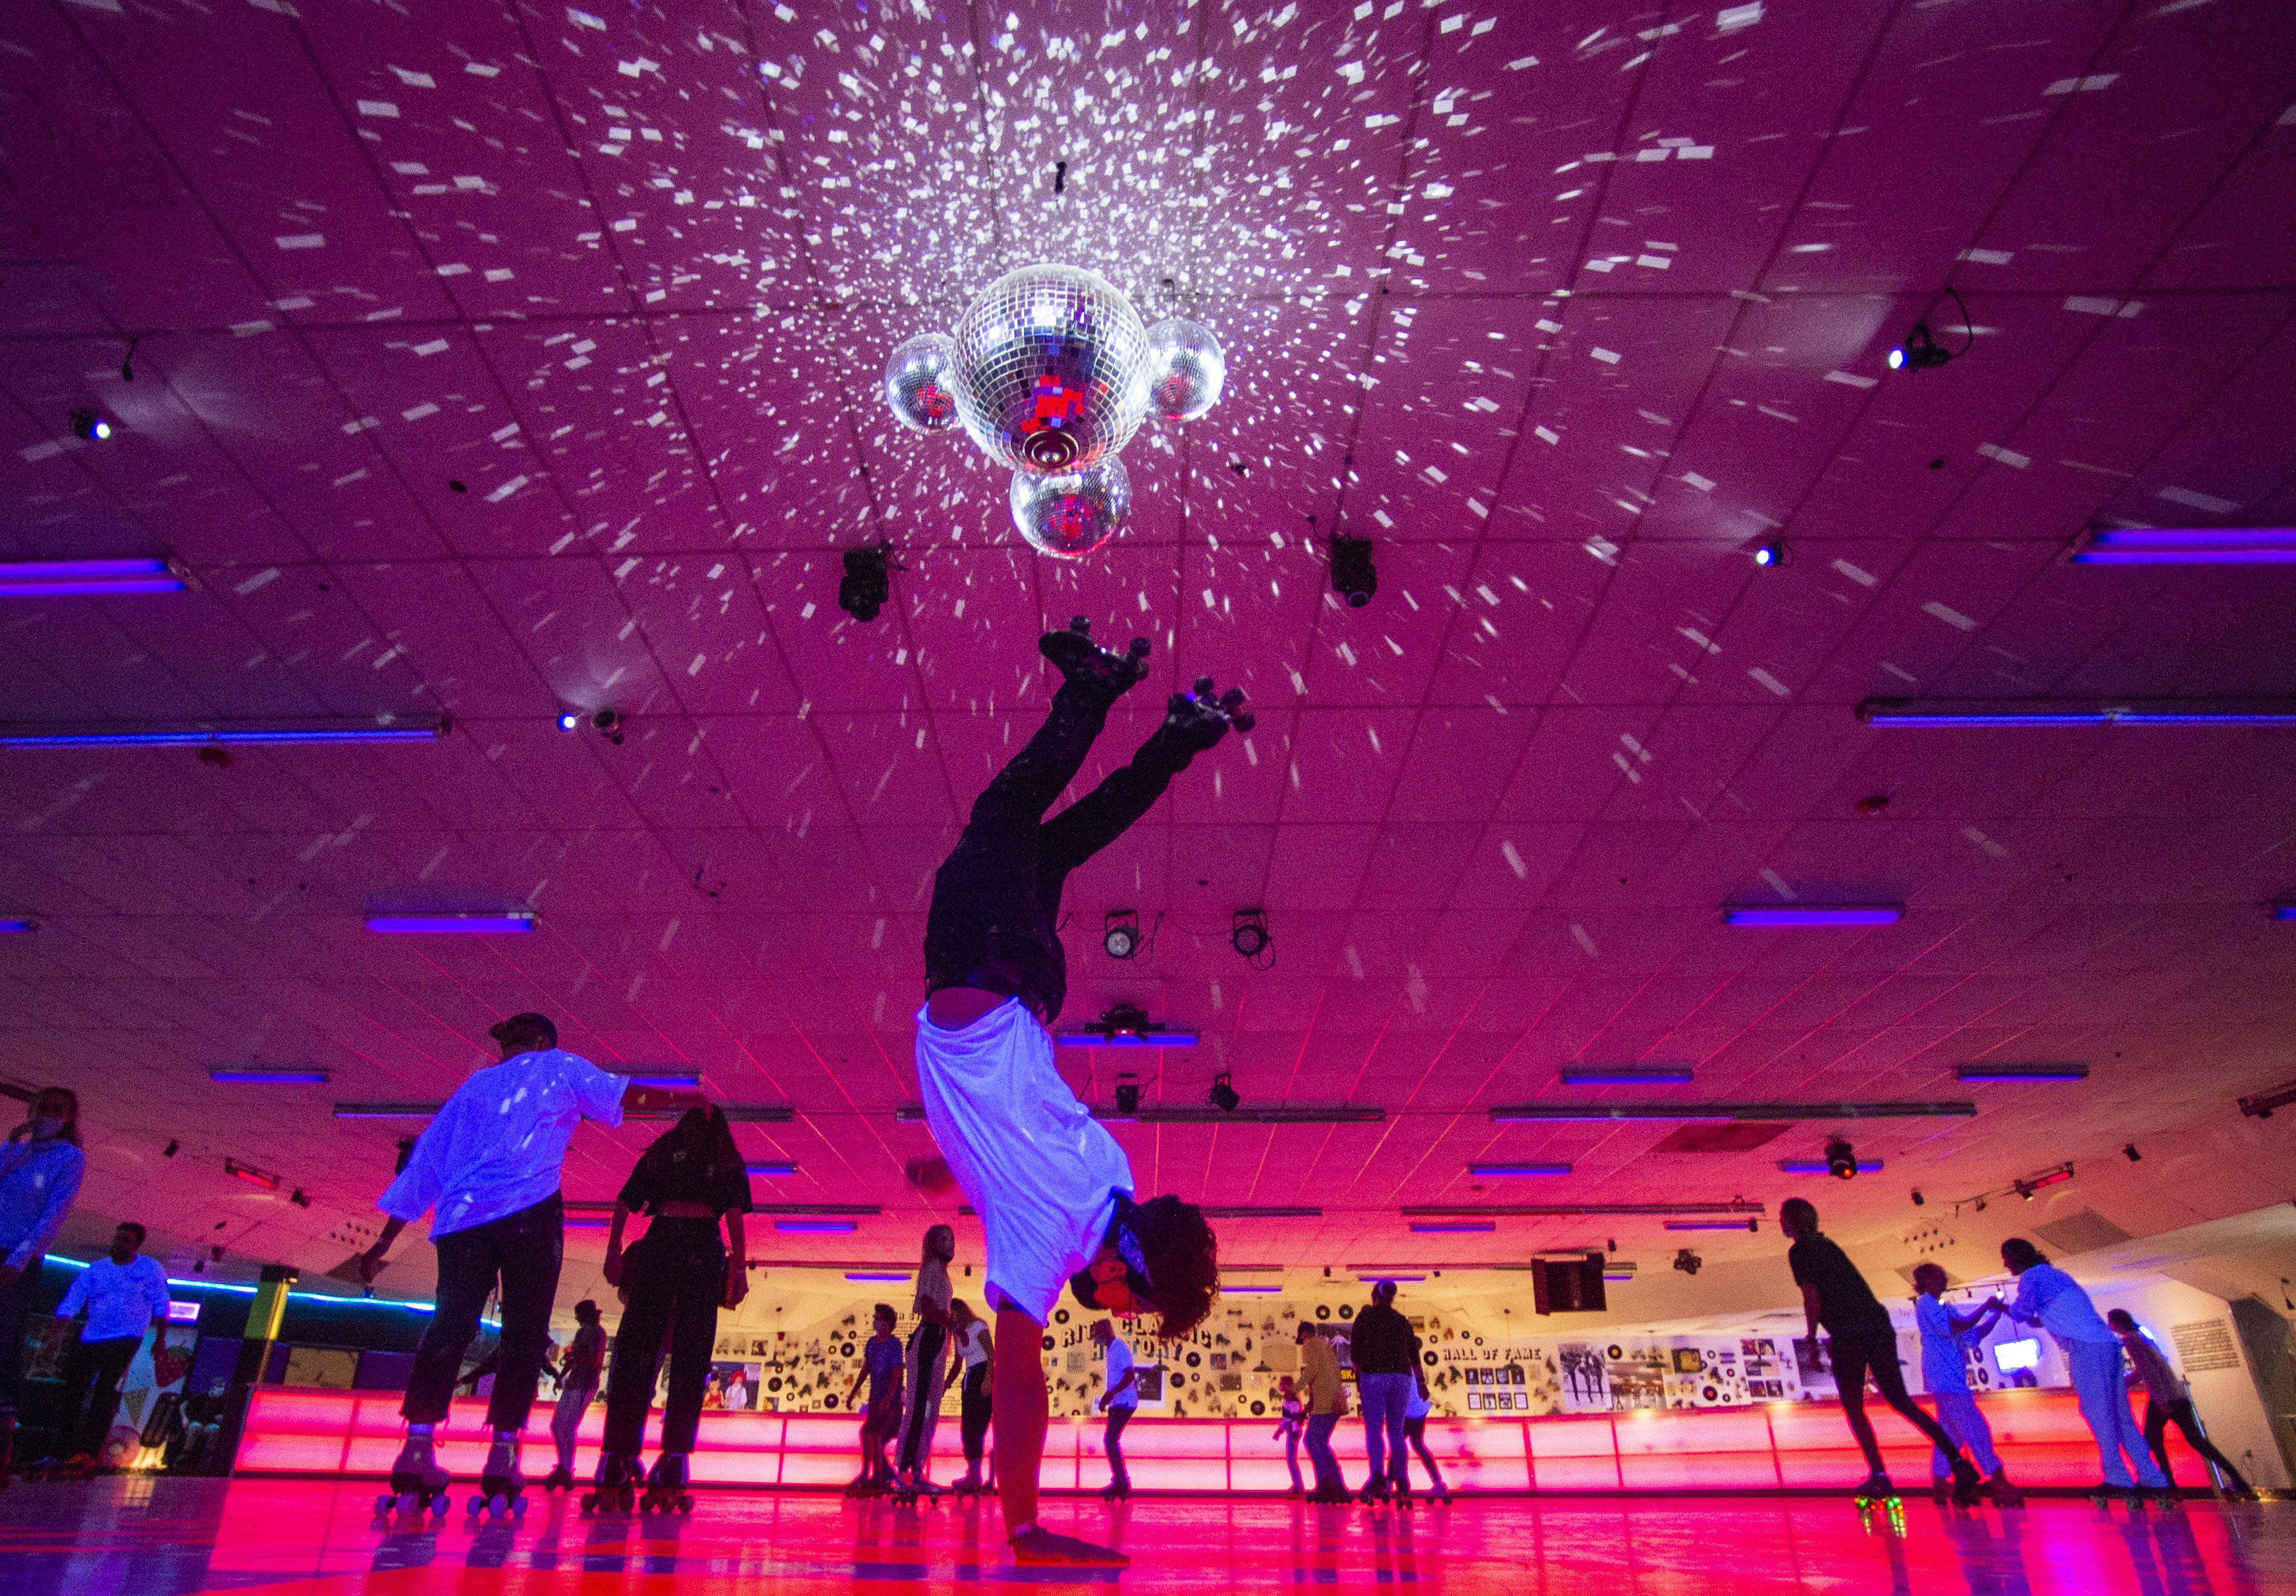 Photos Pandemic Makes Classic Skating S Late Night Disco Dance Party Even More Popular